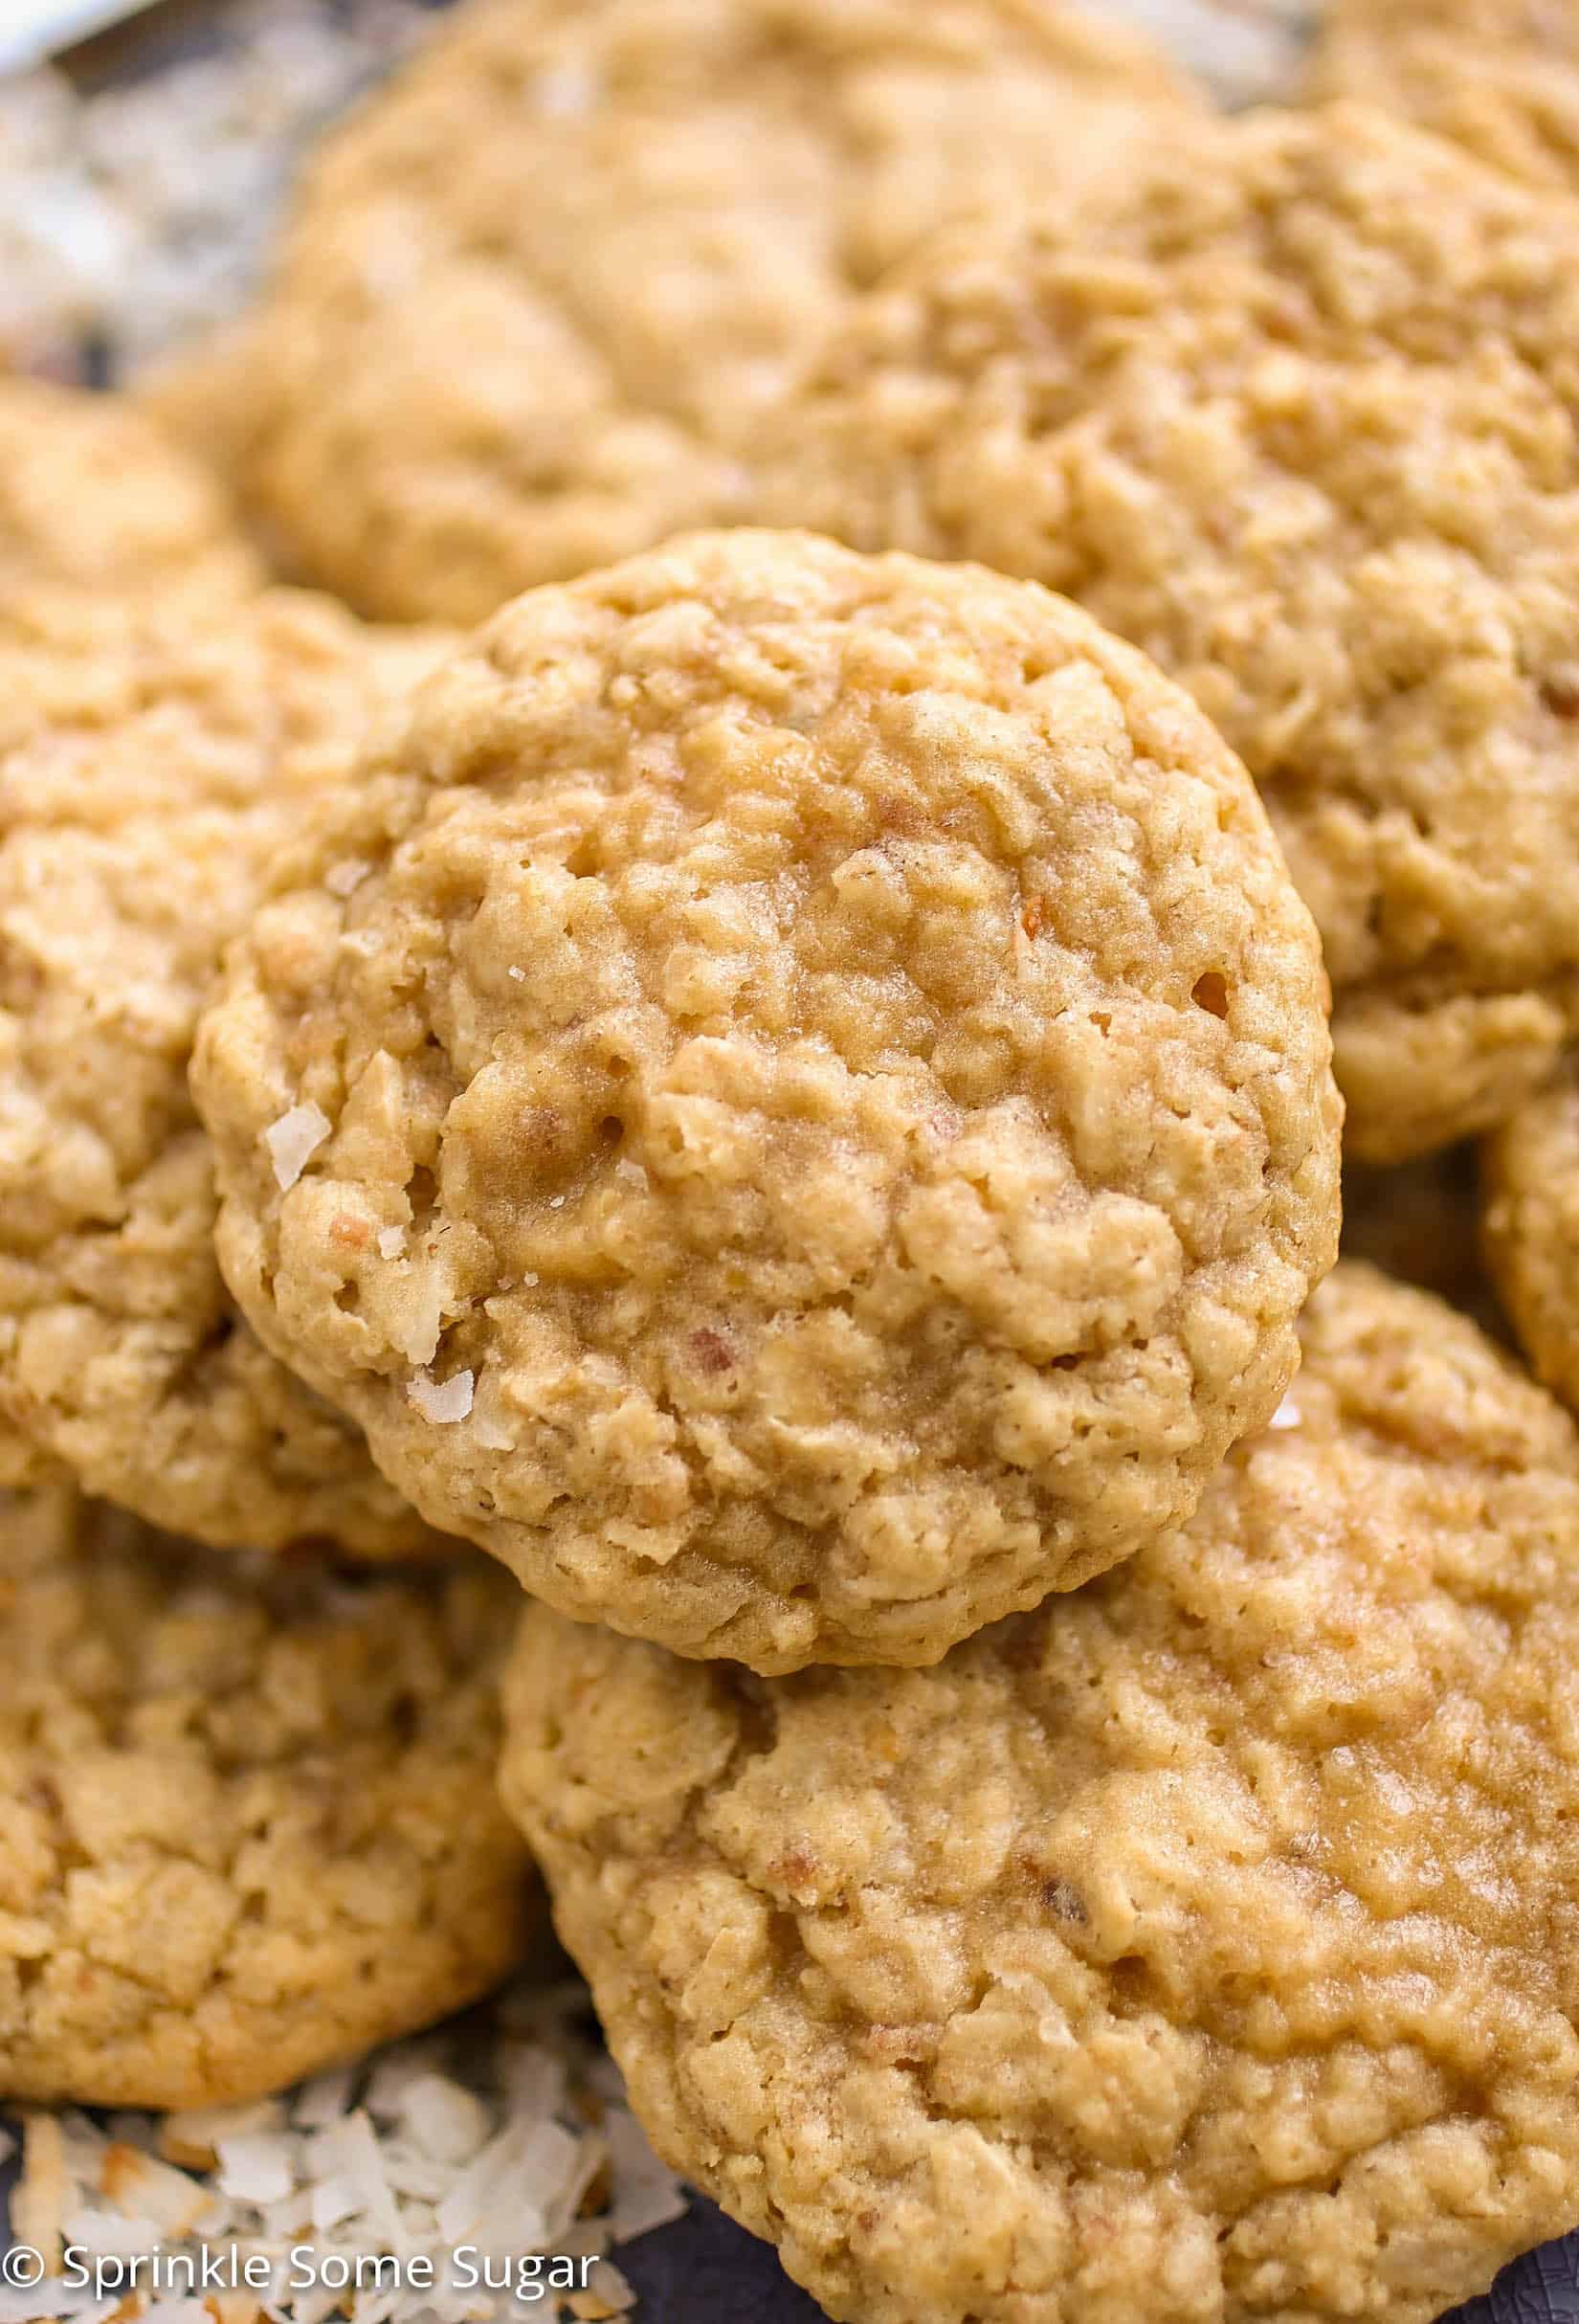 Toasted Coconut Oatmeal Cookies - Soft and chewy oatmeal cookies with the addition of sweet, toasted coconut.